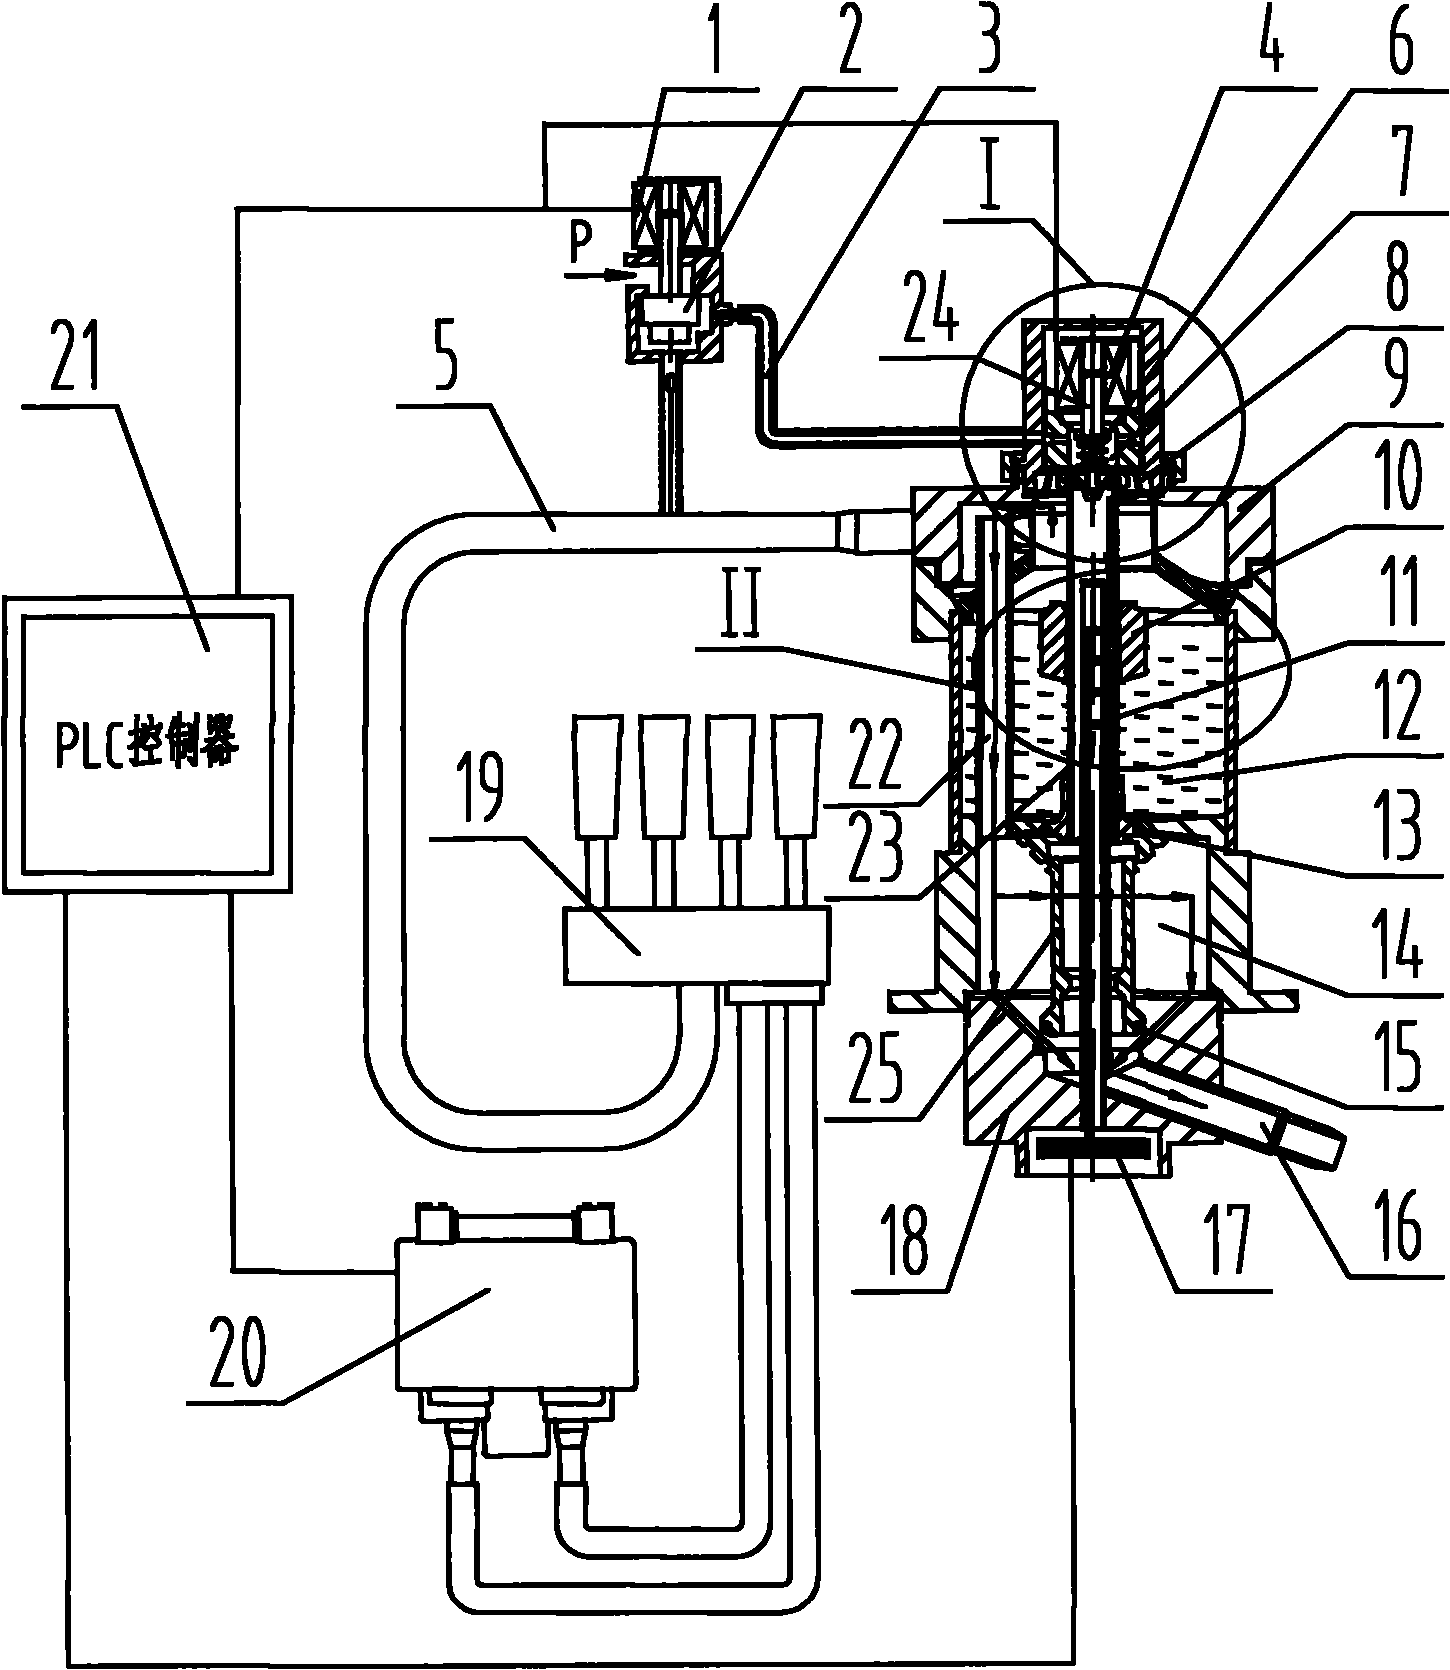 Electronic metering device for milking in constant volume